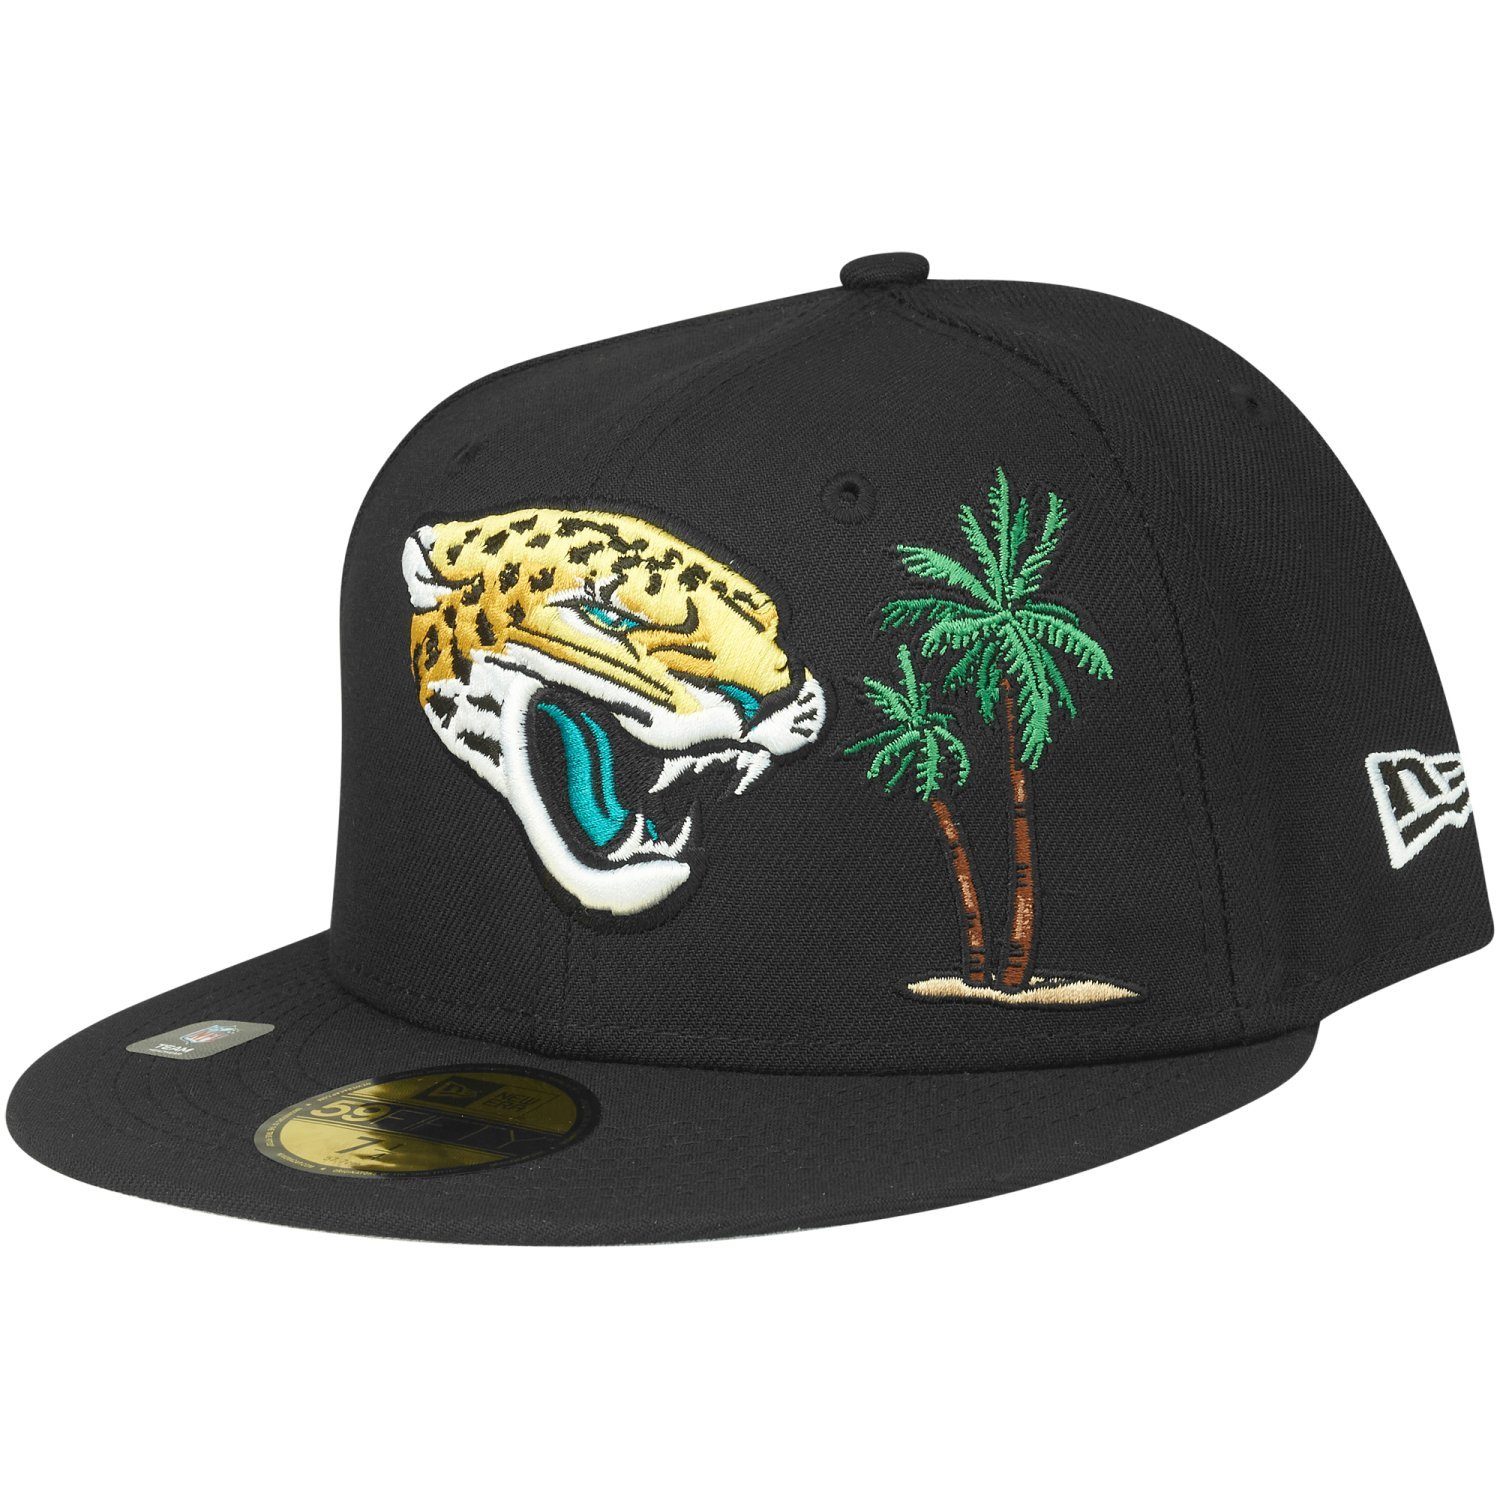 New Era Fitted Cap 59Fifty NFL CITY Jacksonville Jaguars